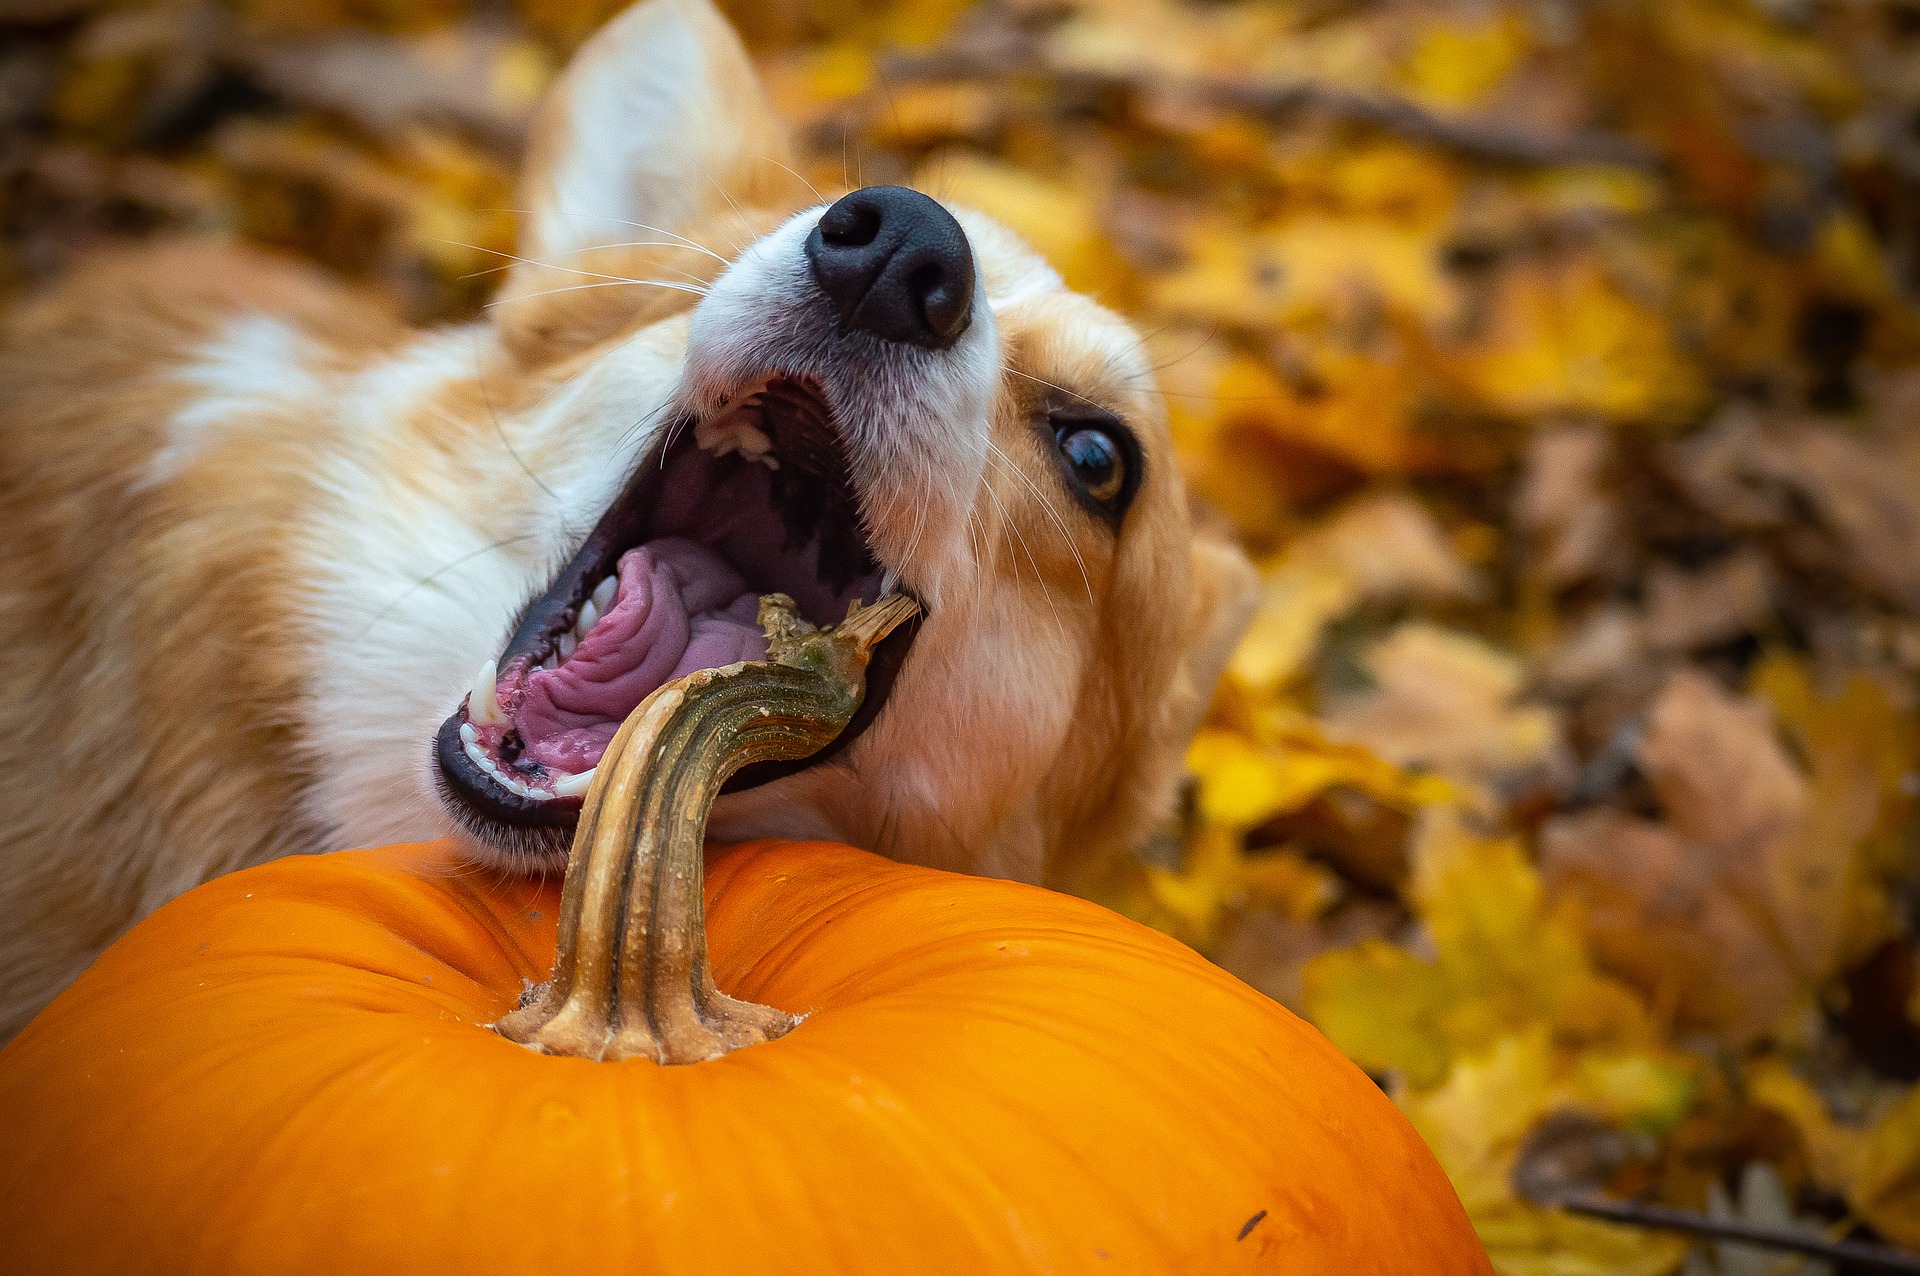 Is pumpkin good for my dog?